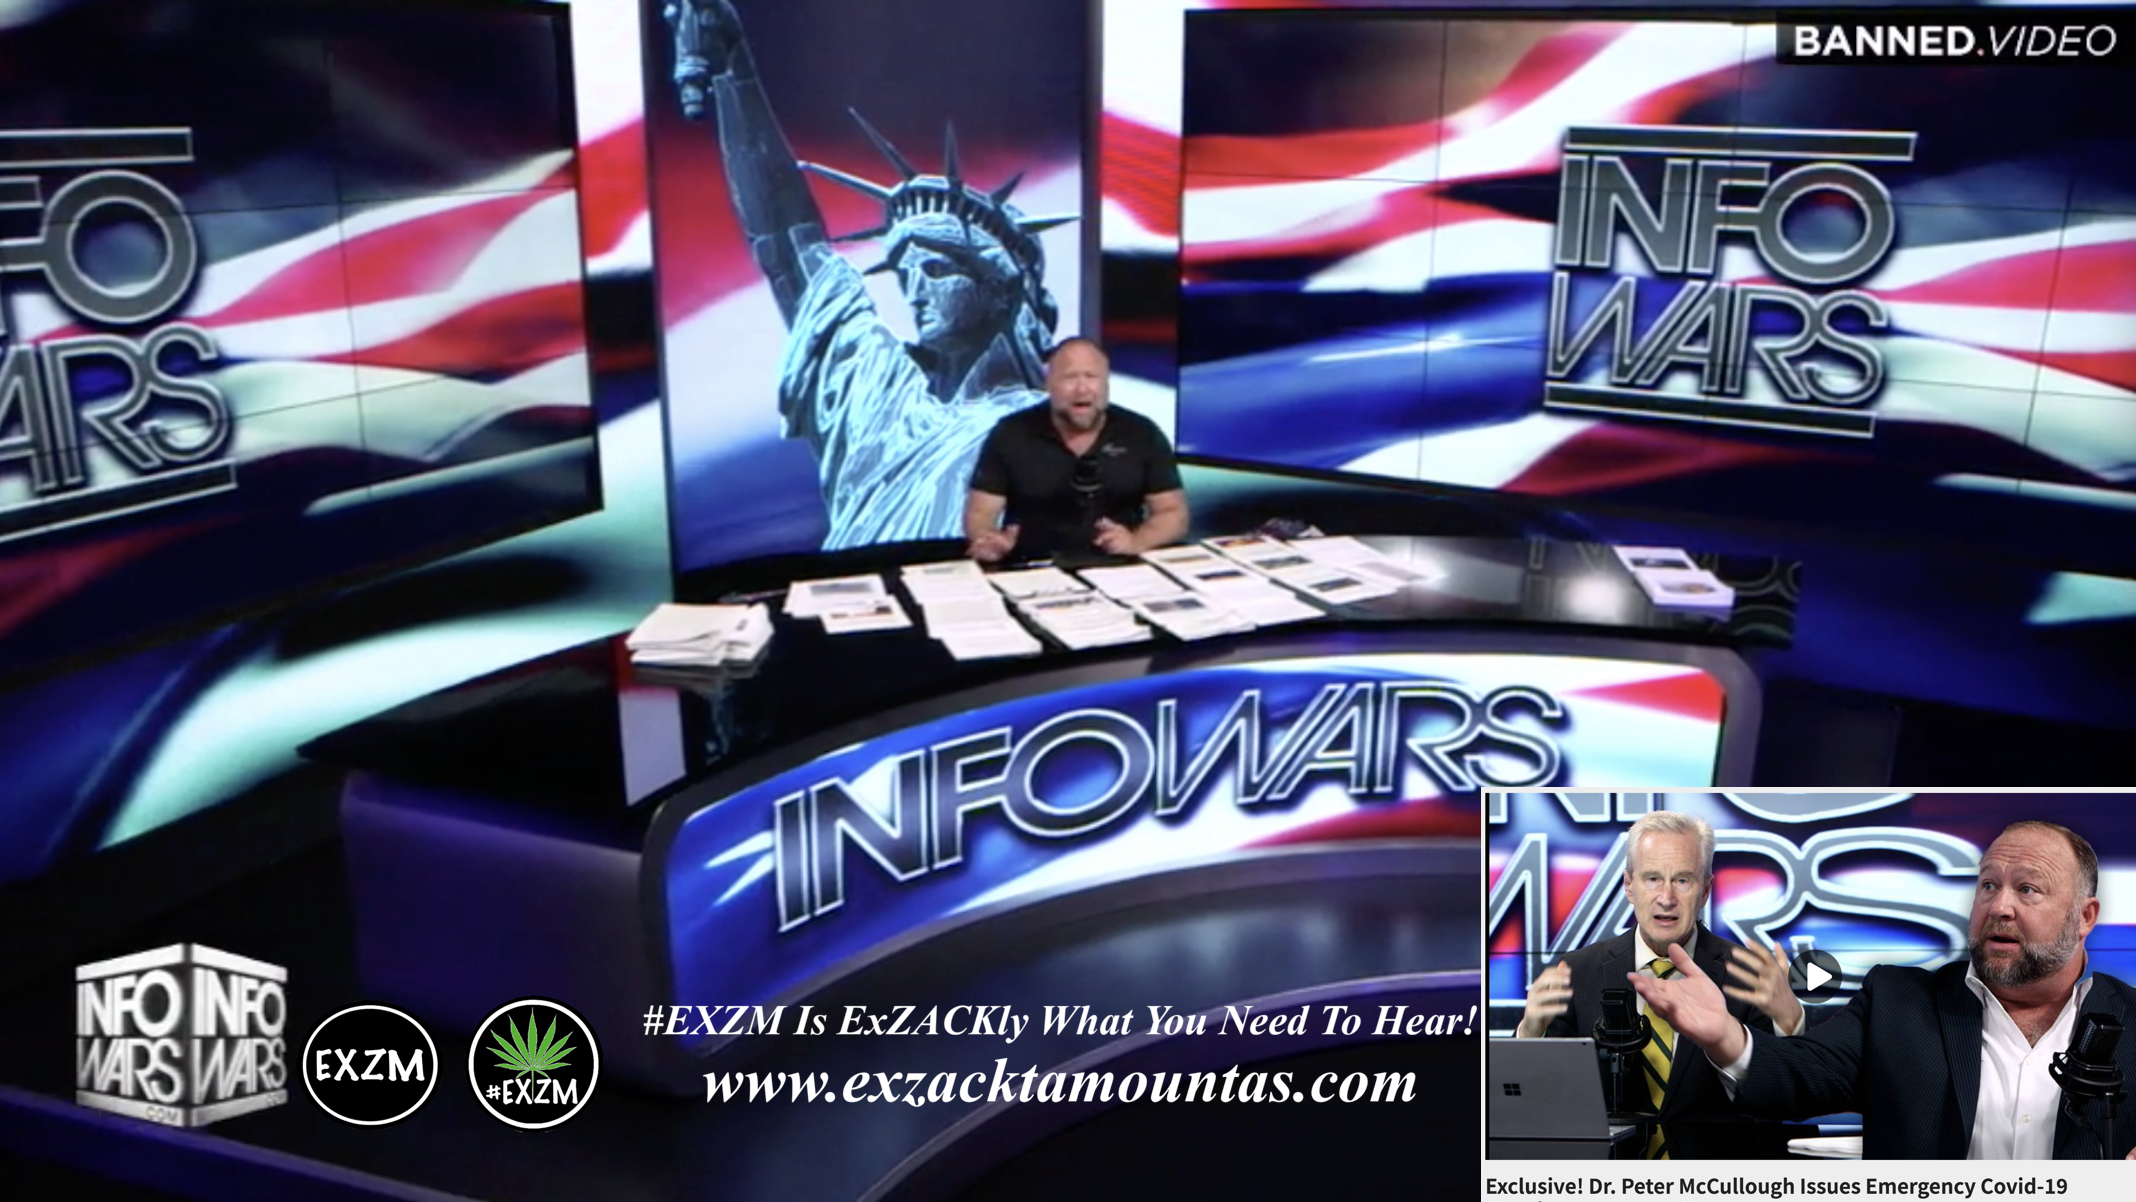 Alex Jones Live In Infowars Studio Dr Peter McCullough Issues Emergency Covid 19 Warning The Great Reset Book Infowars EXZM exZACKtaMOUNTas Zack Mount September 7th 2022 copy